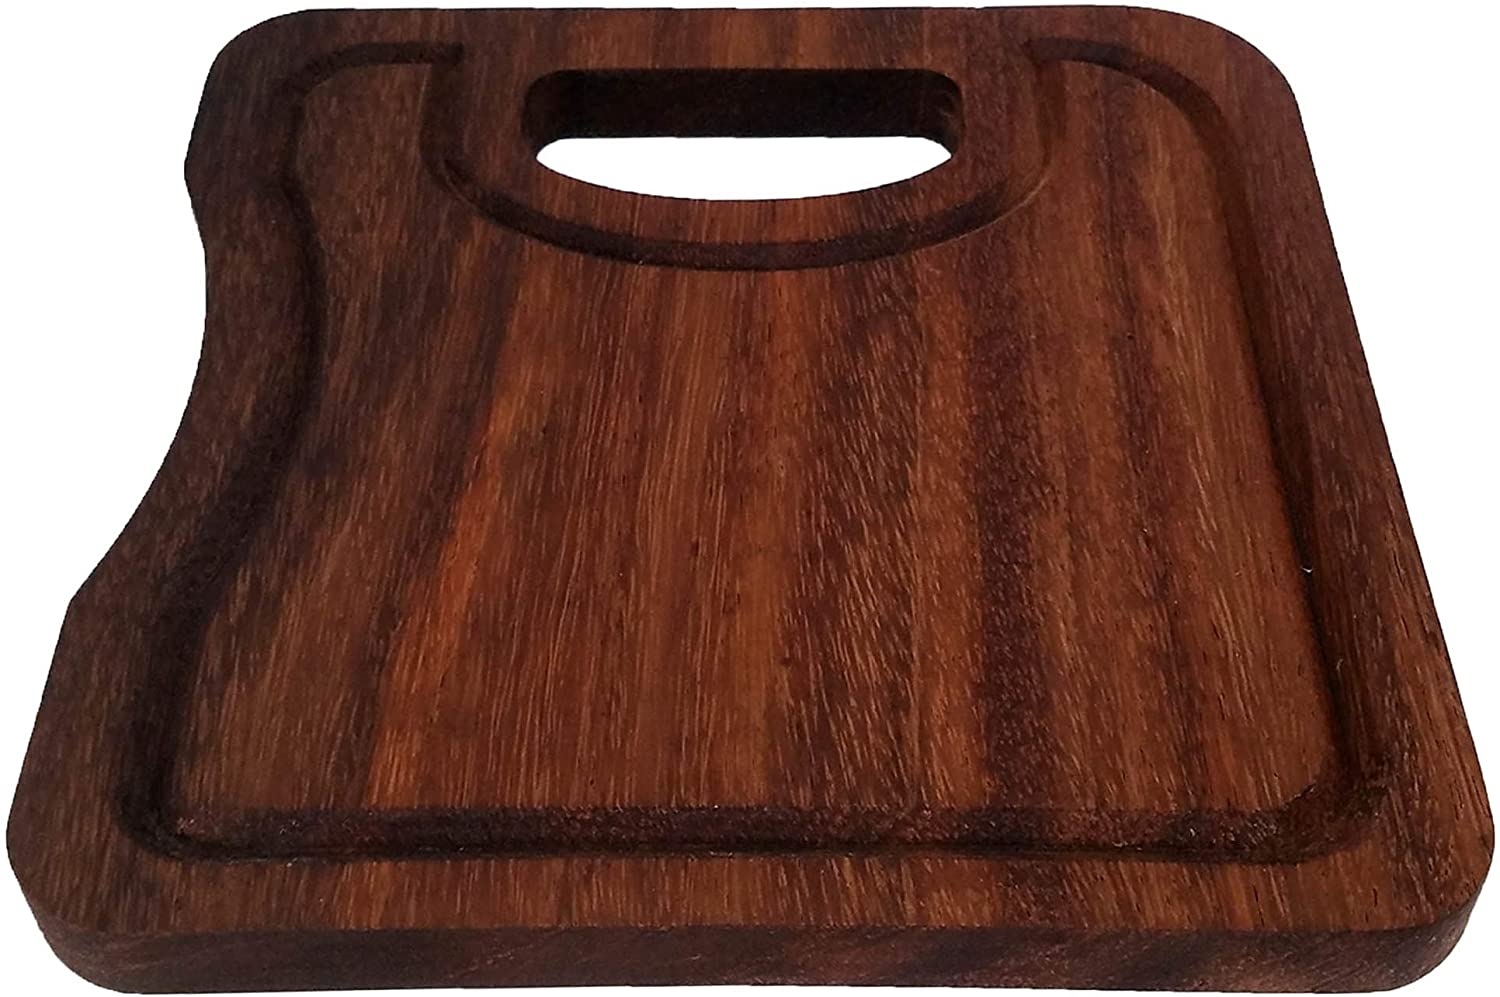 PAROTA WOOD PRODUCTS / Small Parota Wood Serving/Cutting Board with Juice Groove